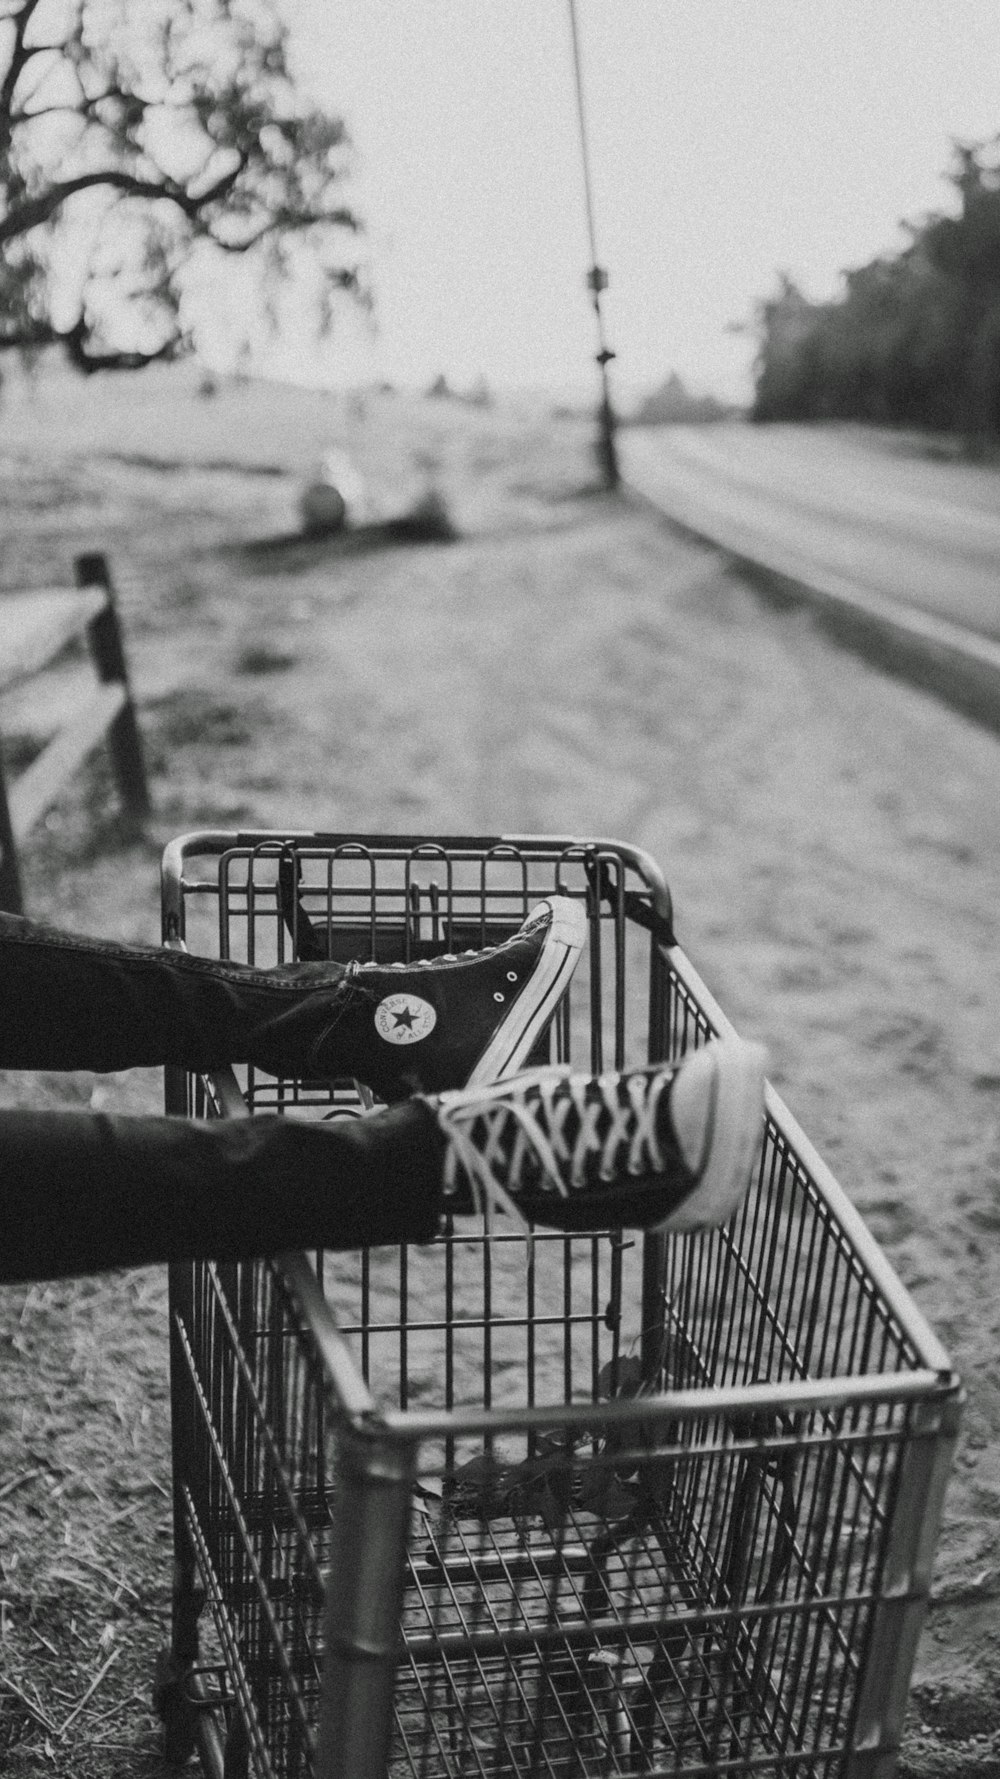 grayscale photo of person foot on metal grocery cart